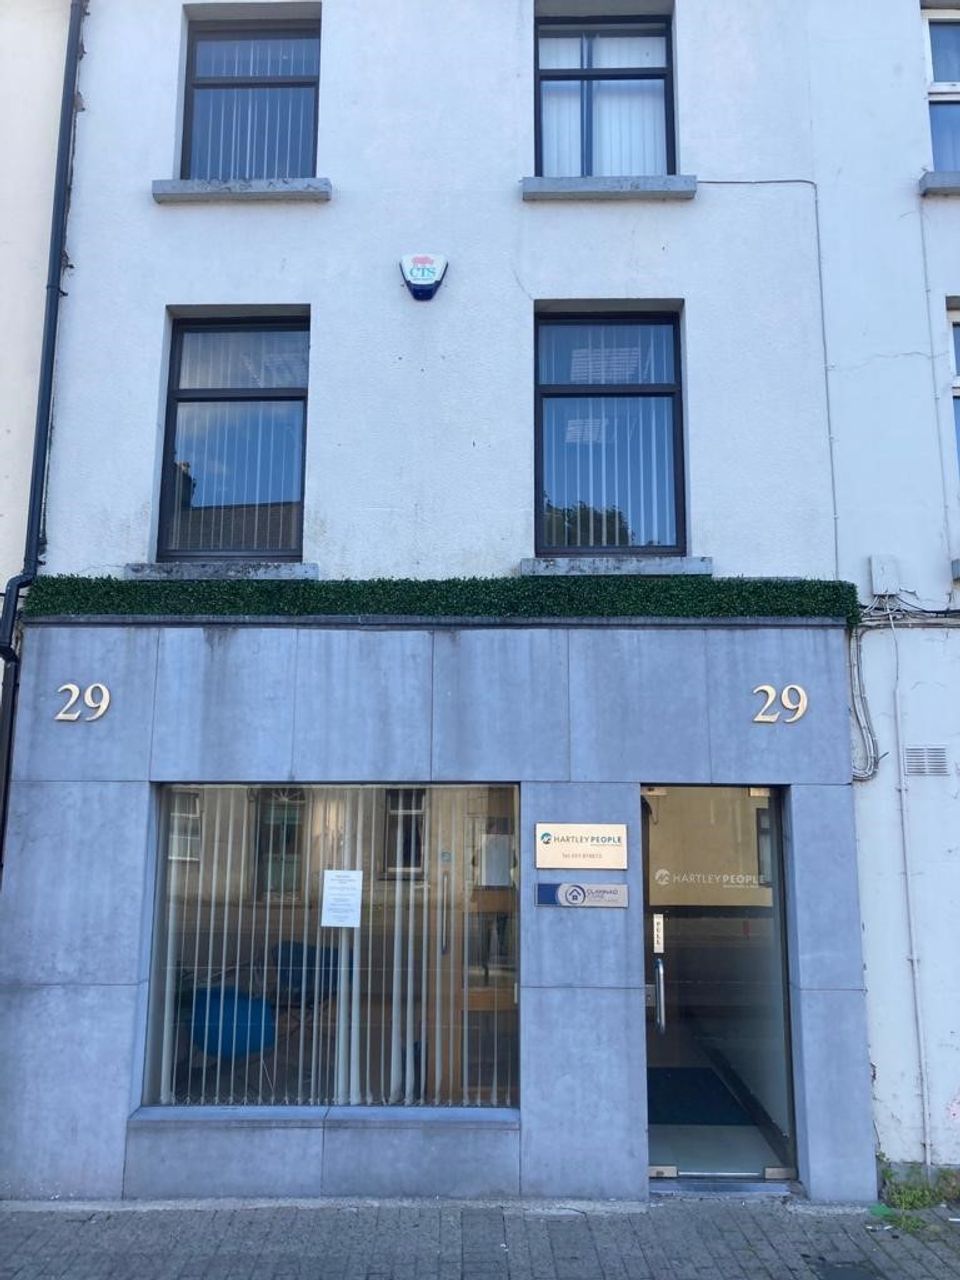 29 Manor Street Waterford, Waterford City, Co. Waterford